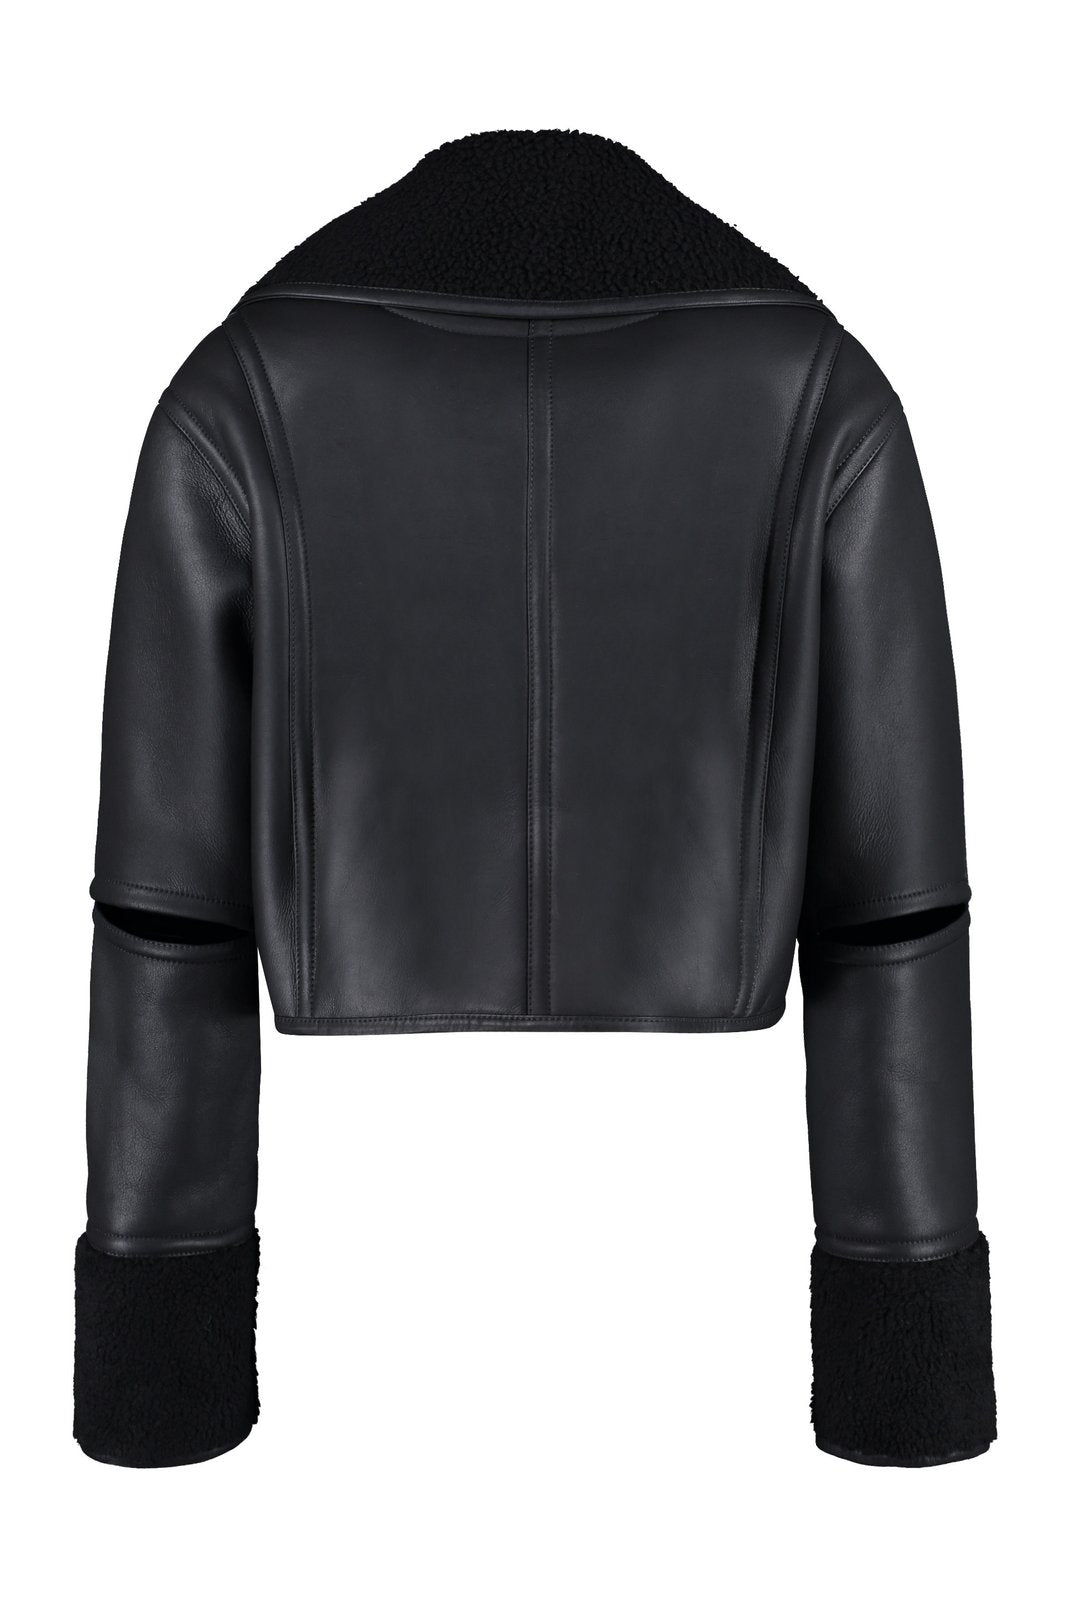 Loewe Double-Breasted Cropped Jacket